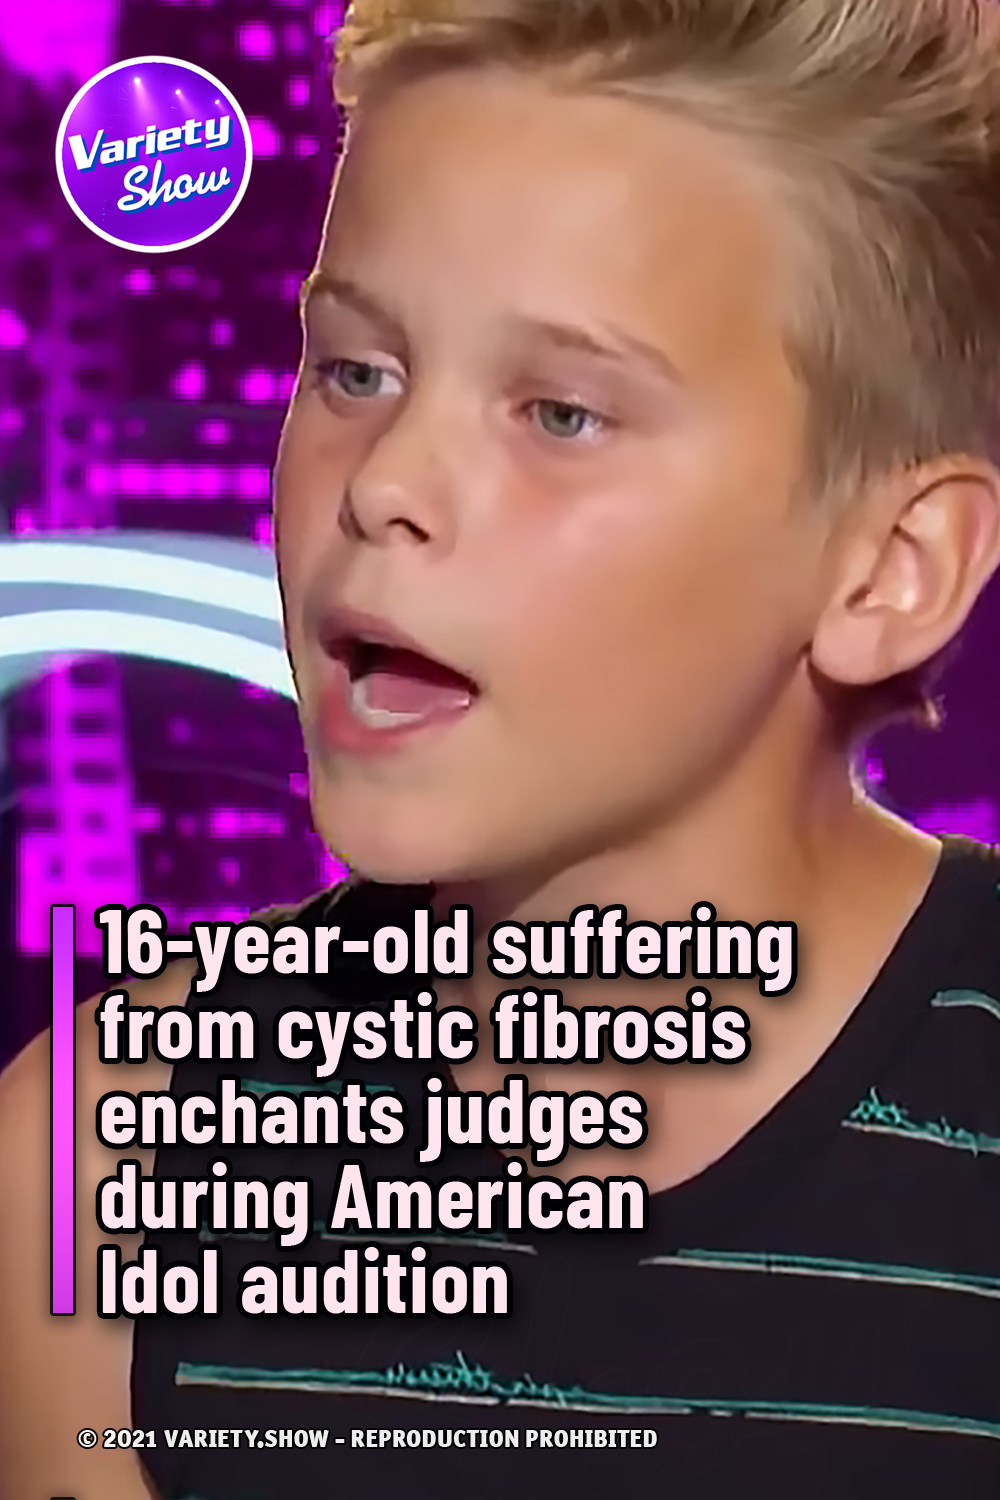 16-year-old suffering from cystic fibrosis enchants judges during American Idol audition